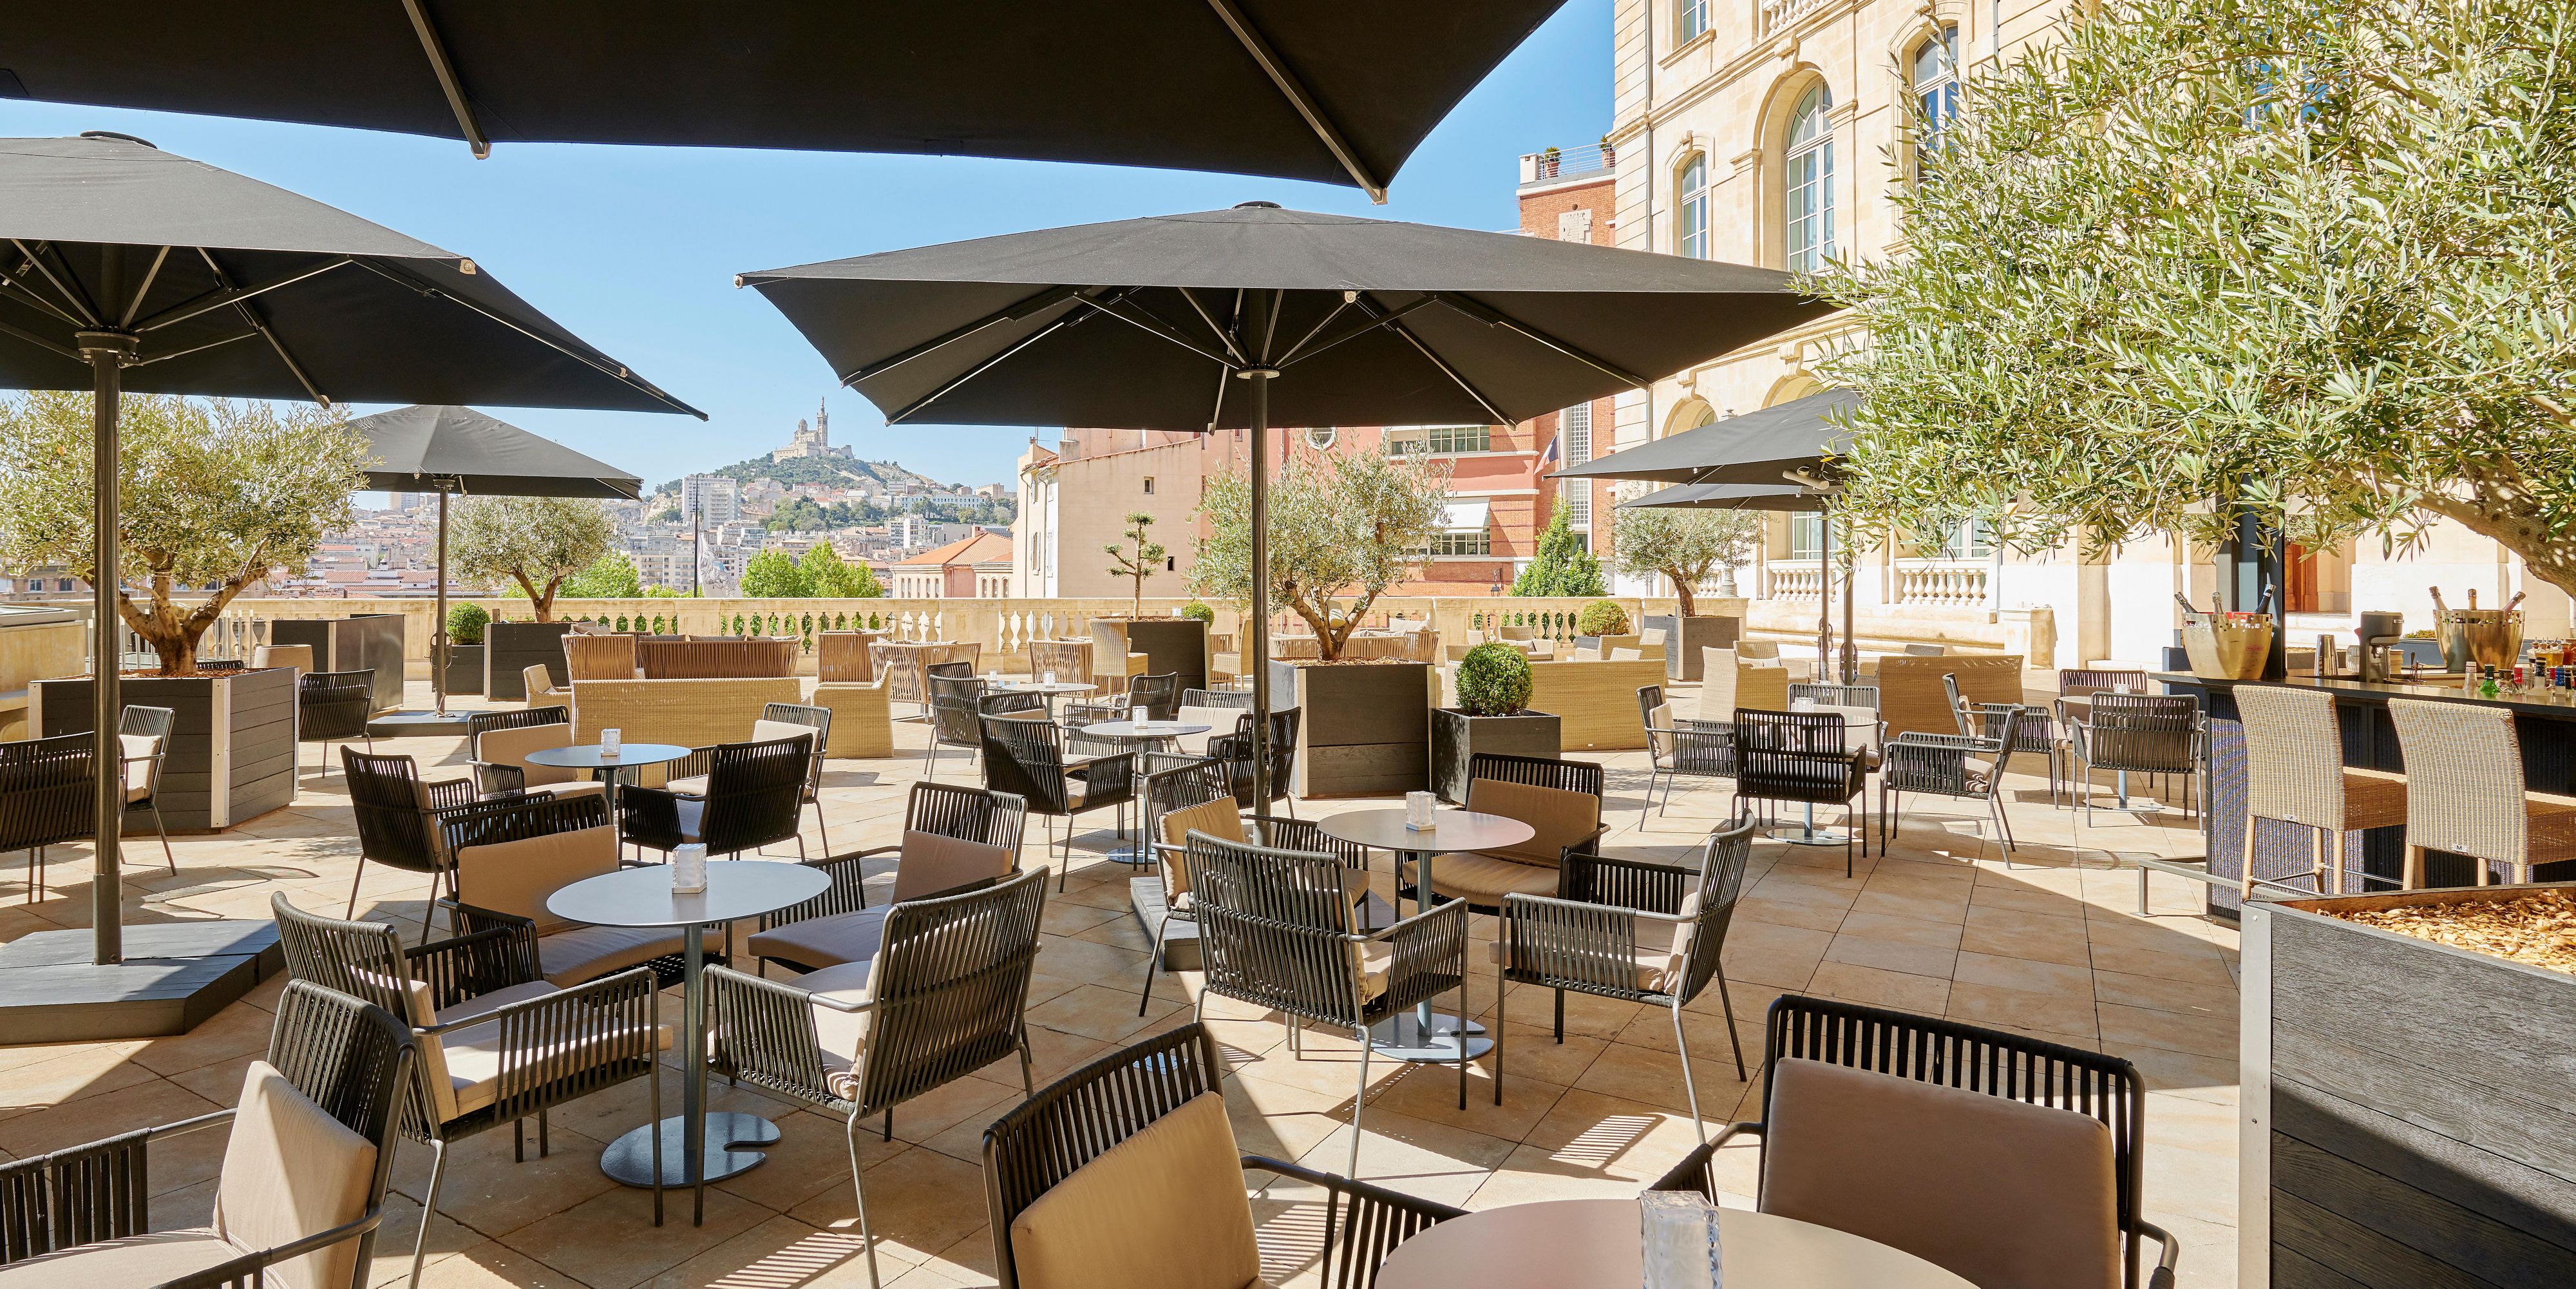 Our sunny terrace is now open! Enjoy a tasty parenthesis at Les Fenêtres brasserie. A modern and convivial Mediterranean cuisine is waiting for you. Rather snacking? See you at the Capian bar!